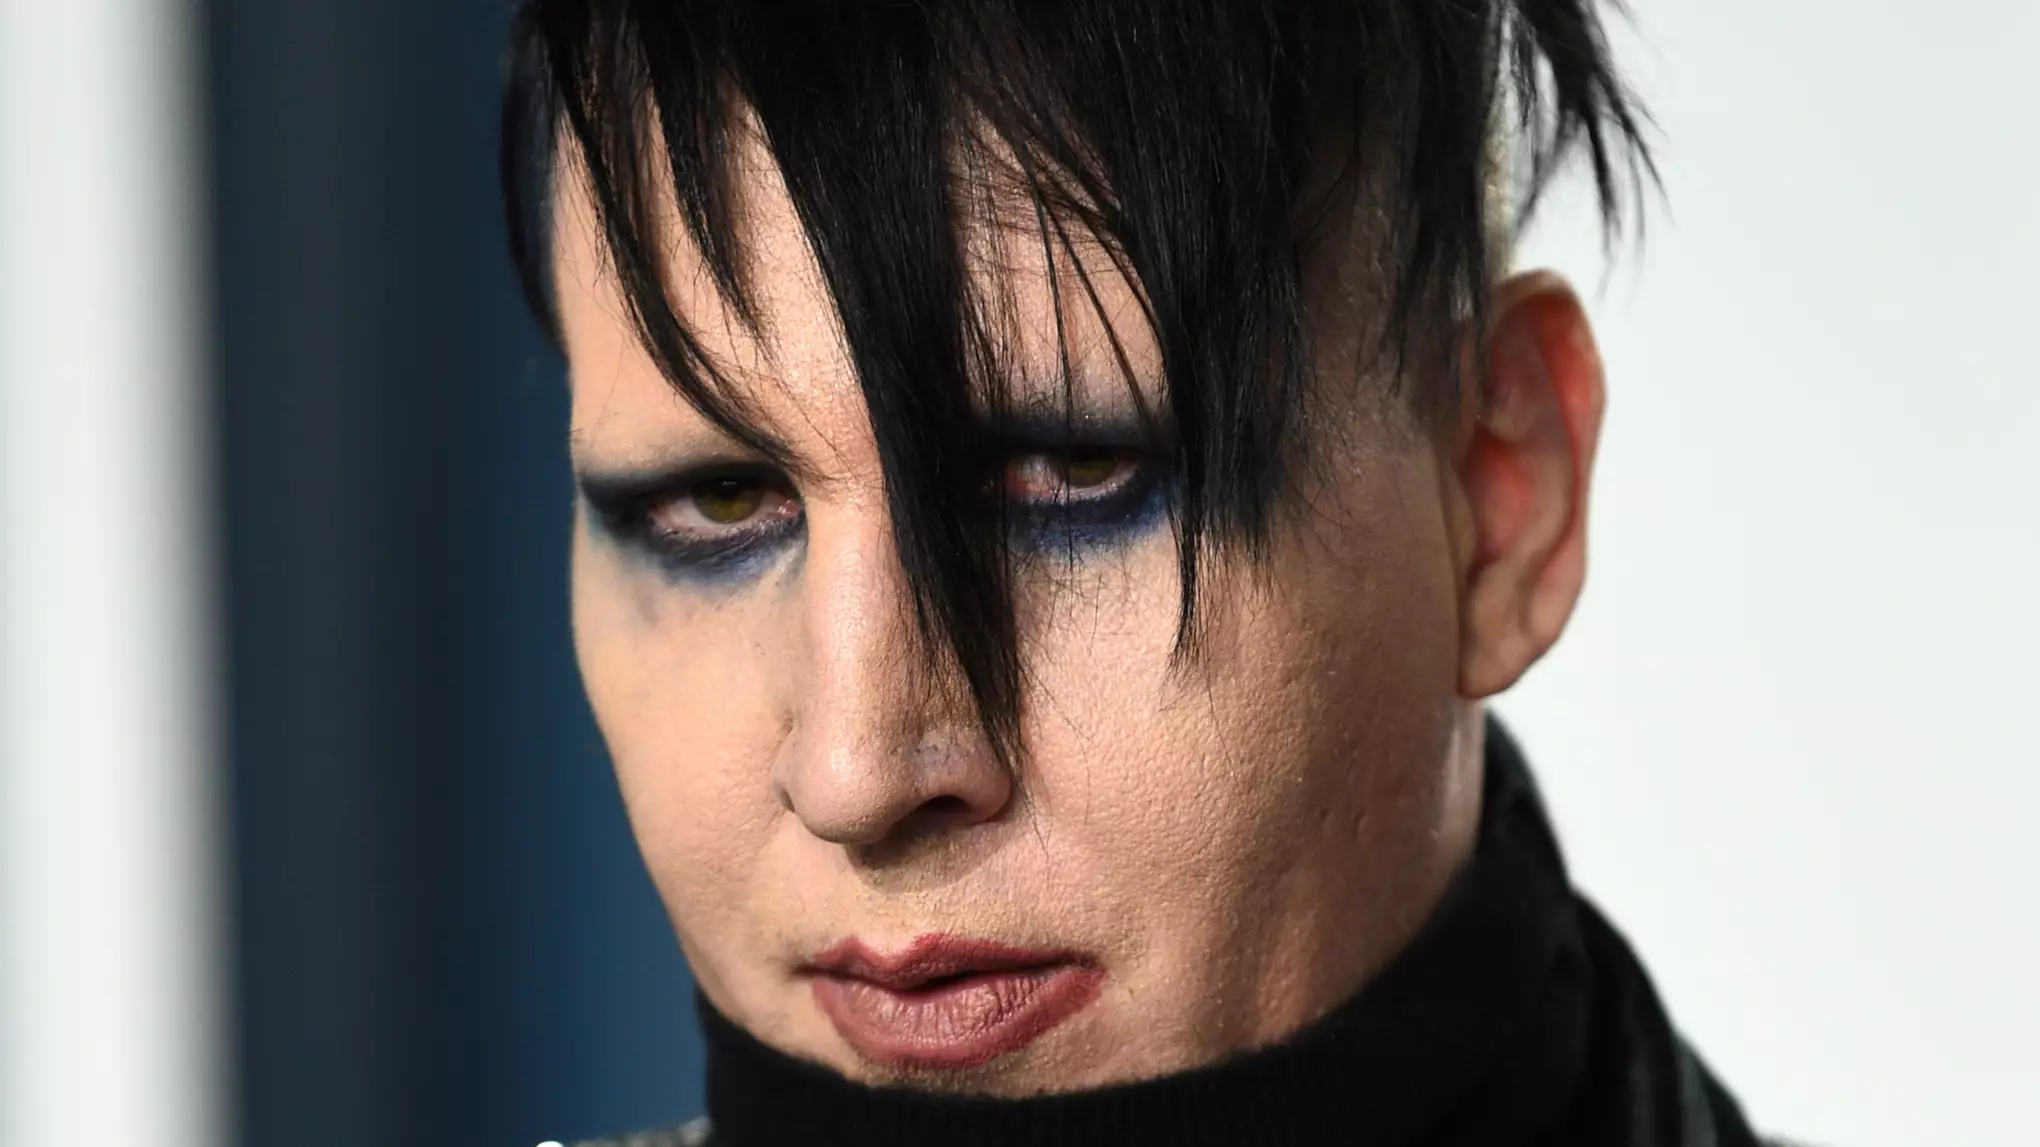 Marilyn Manson Dropped By Record Label Over Abuse Allegations